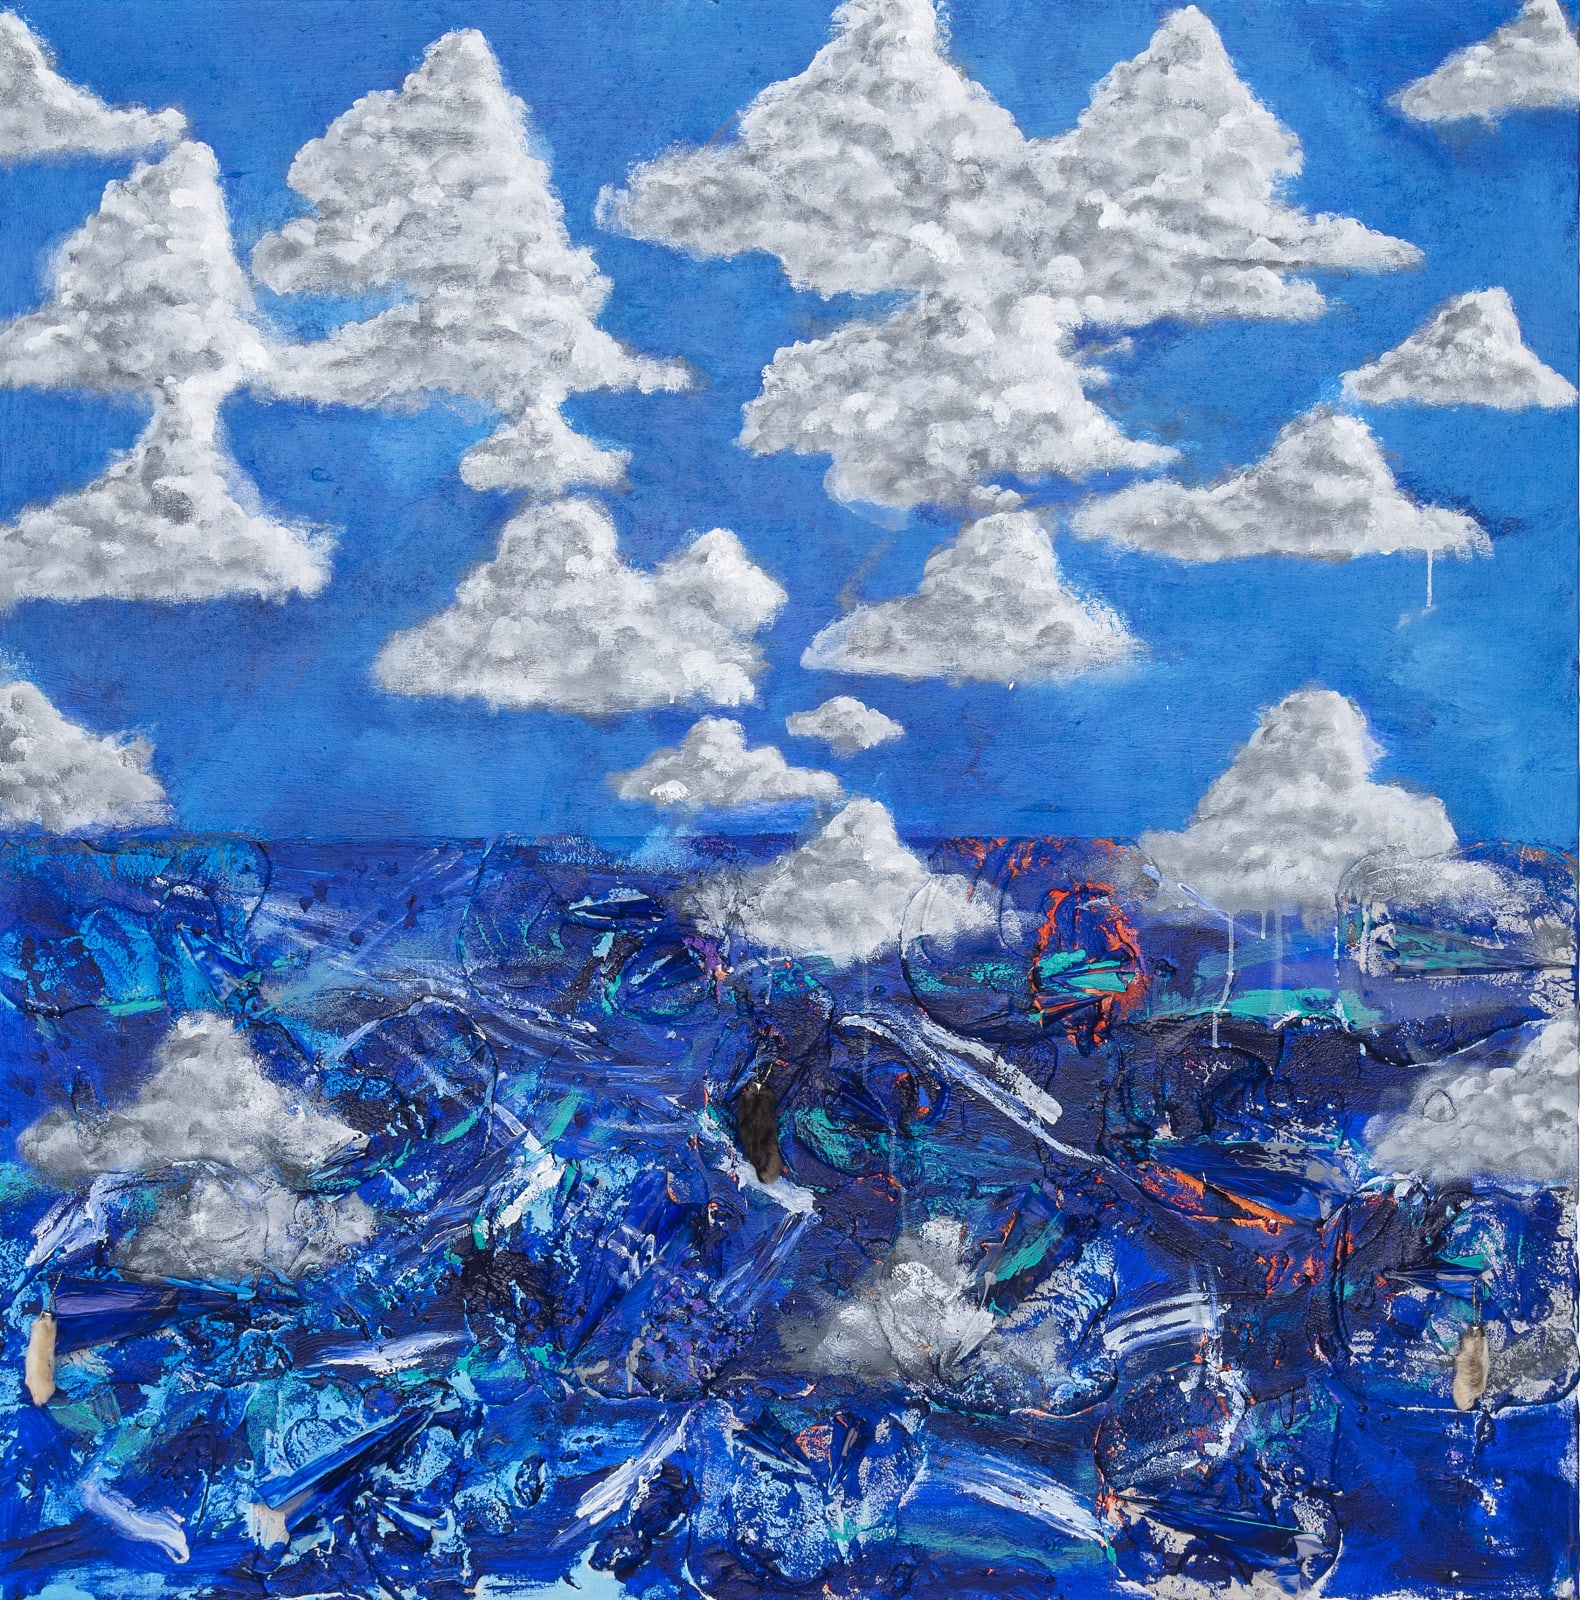 Ryan Cosbert, Dared To Dream, 2022, 152.4 × 152.4 cm / 60 × 60 in, Acrylic, resin, and paper airplanes on linen